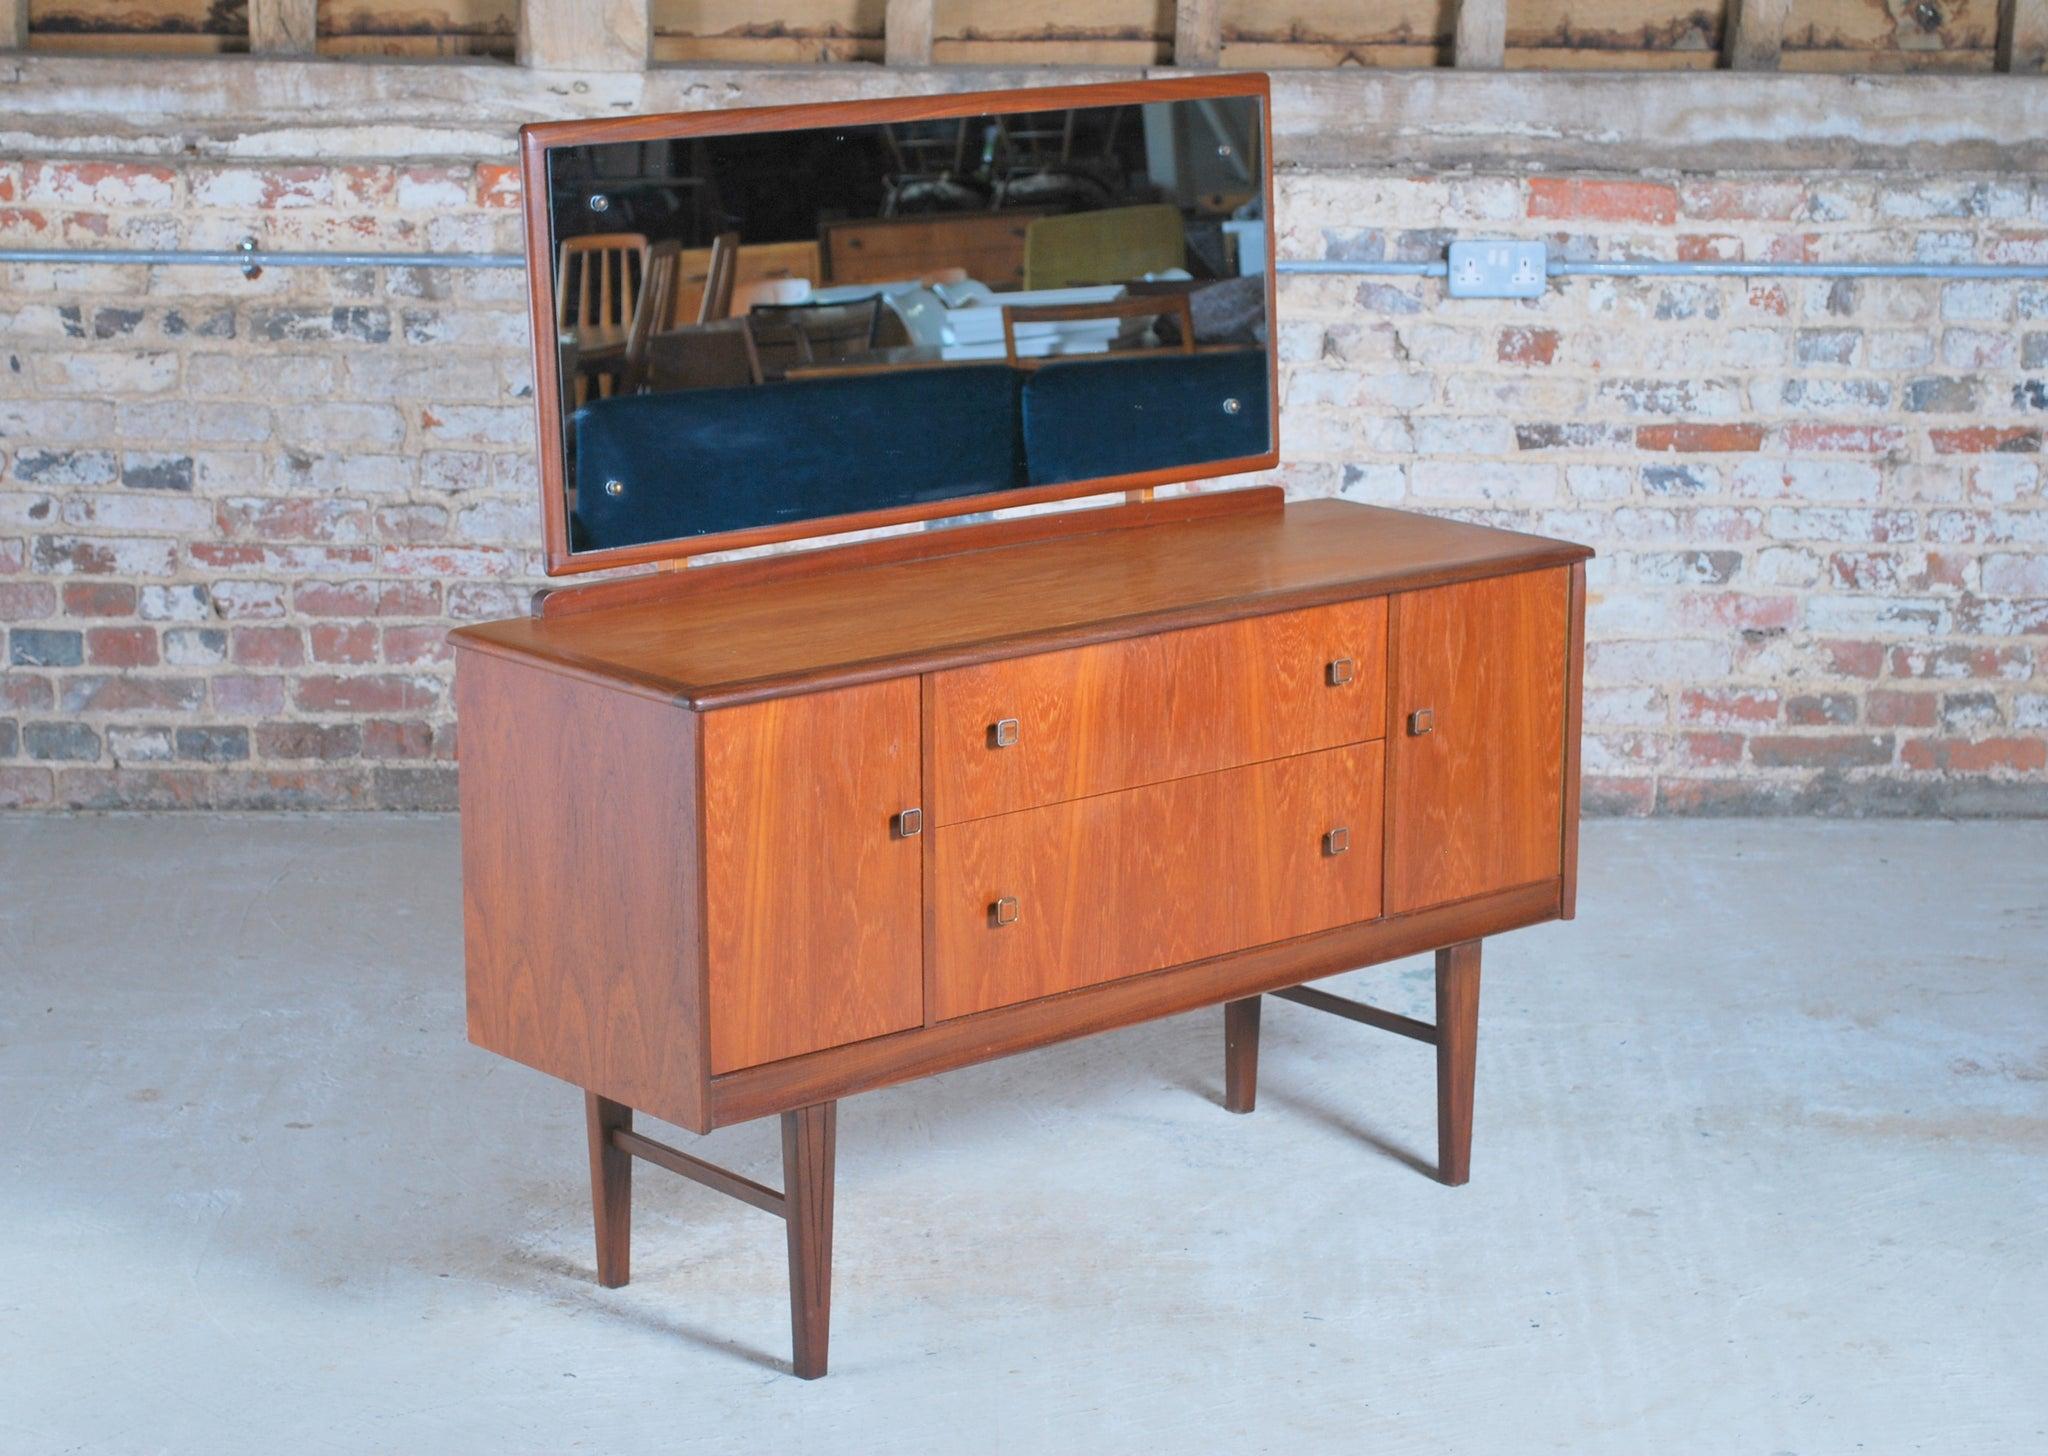 Mid century teak dressing table by Homeworthy, England, circa 1960s. 3 drawers and 2 cabinets. Mirror and mirror mounts can be removed.

Dimension: W 123cm x D 42cm x H 121cm
Chest height: 72cm.